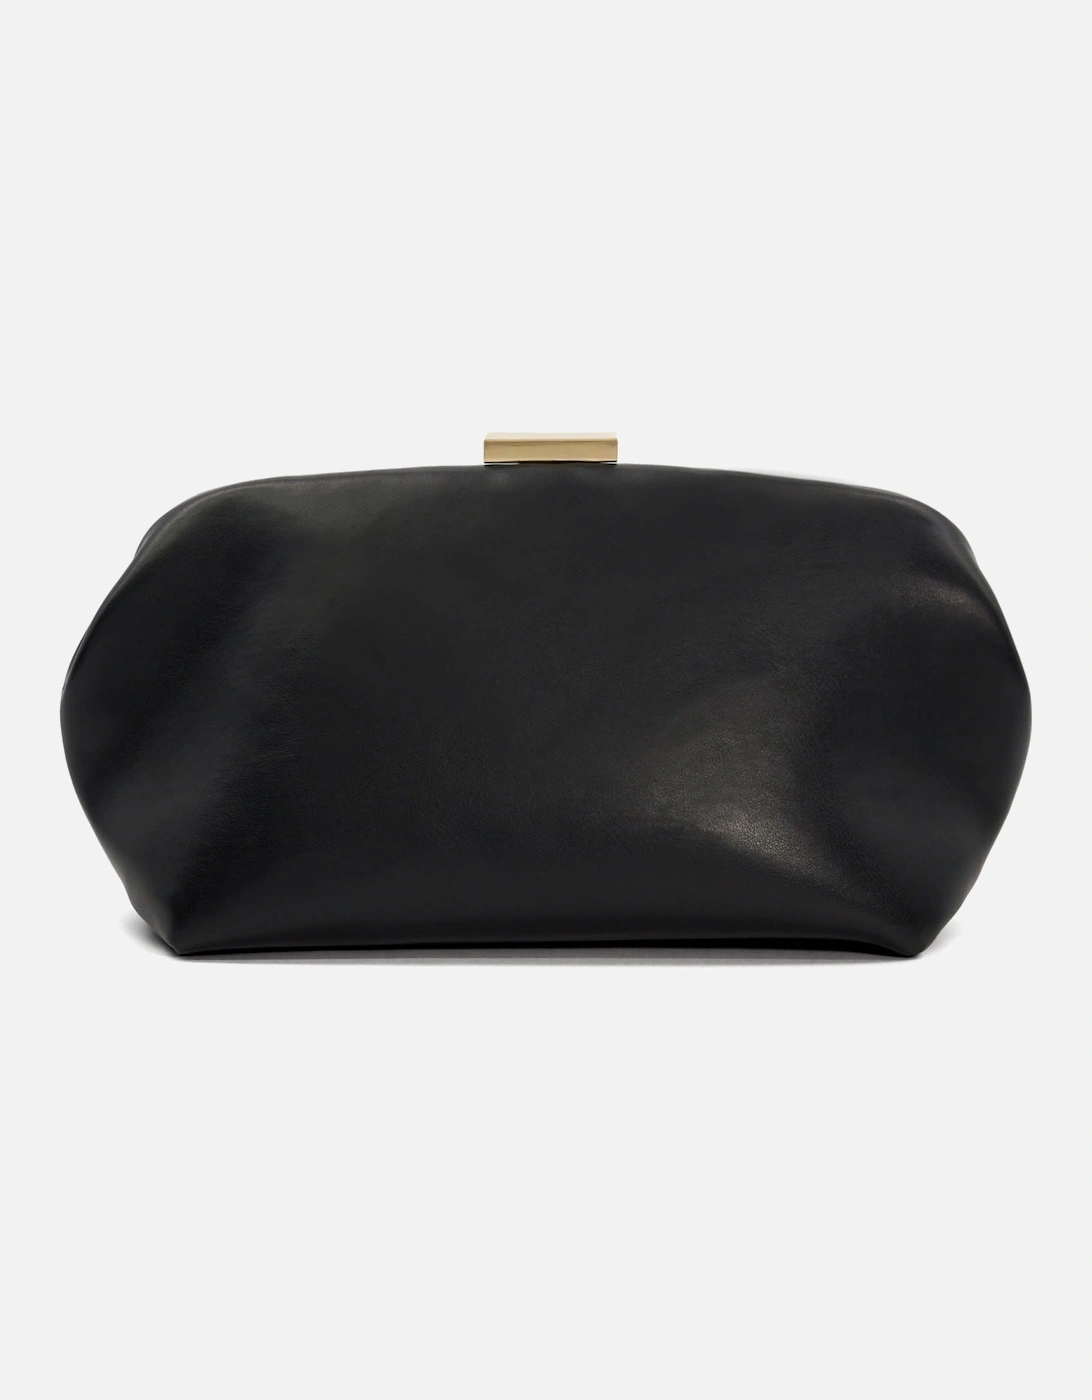 Accessories Expect - Clasp Clutch Bag